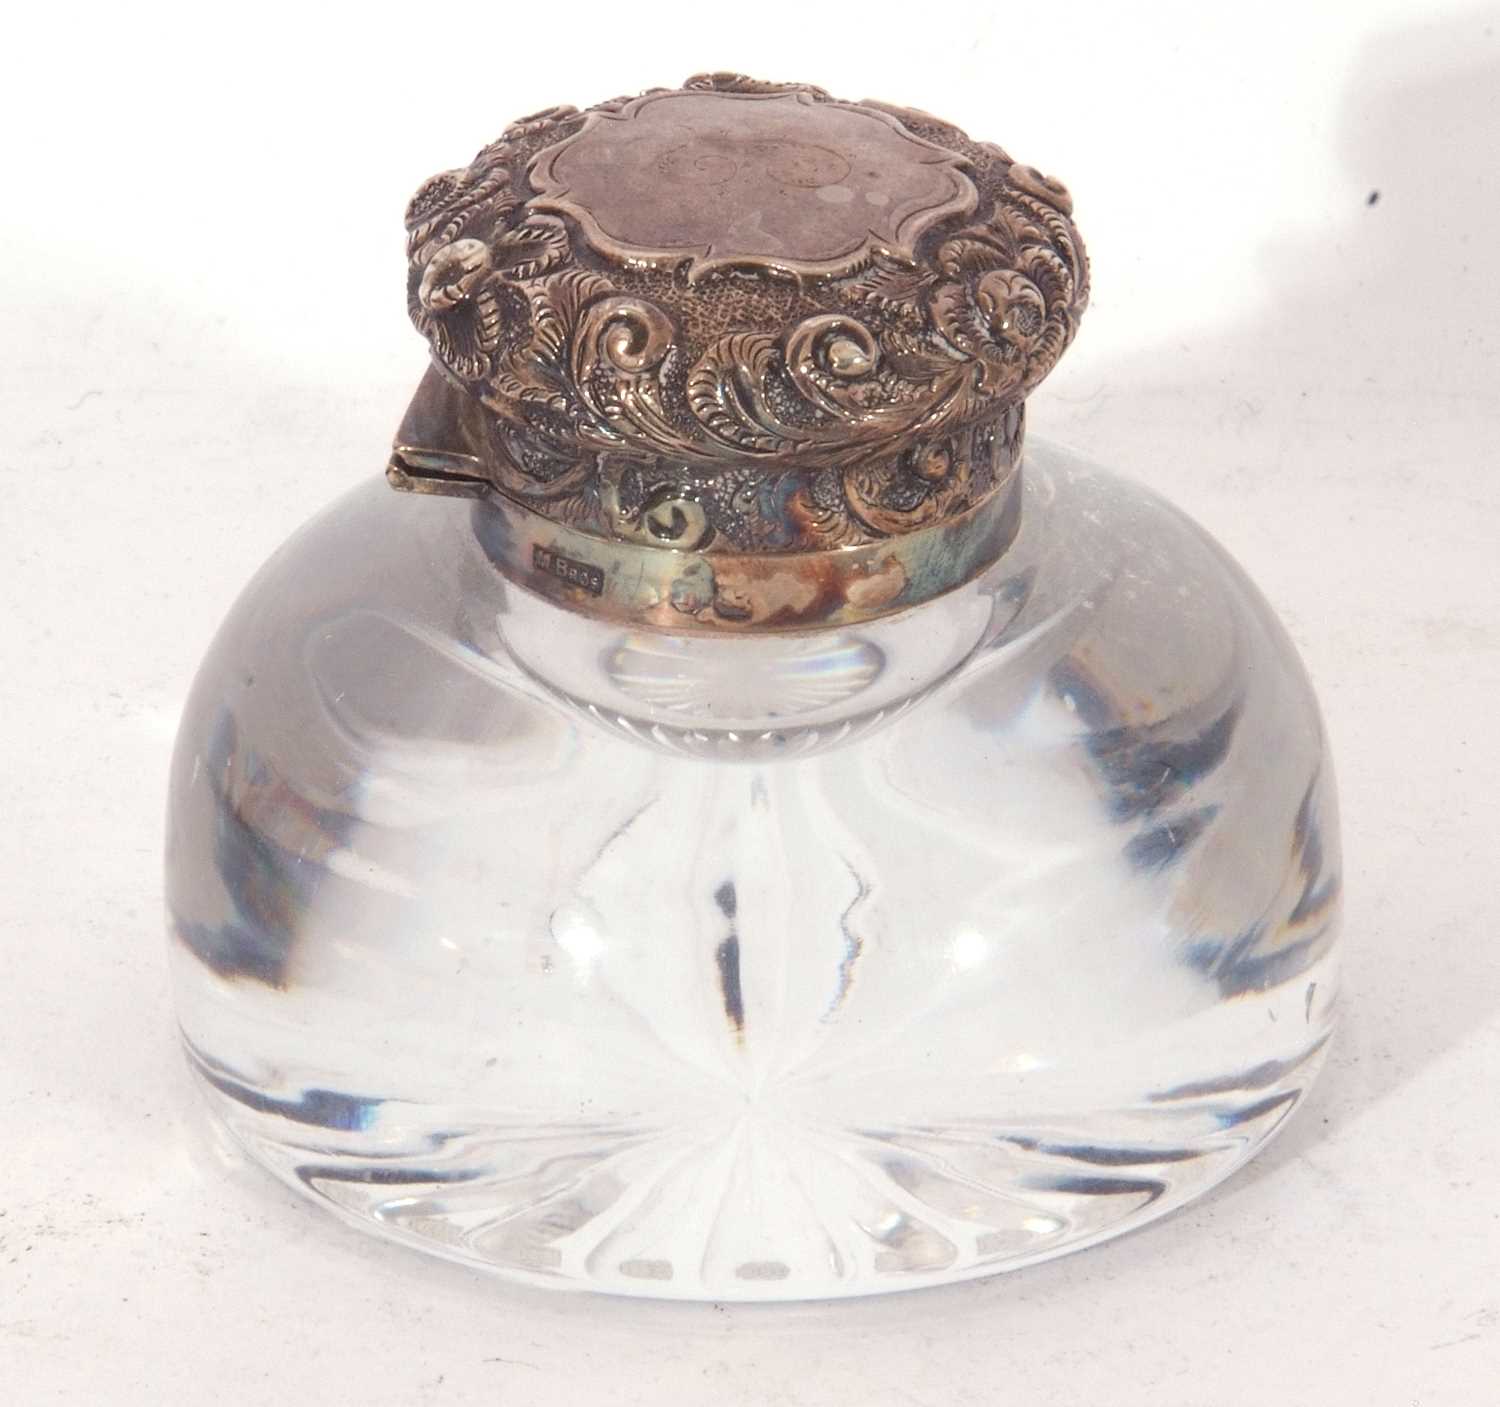 Circular clear glass inkwell with star cut base, hinged silver lid with embossed floral and